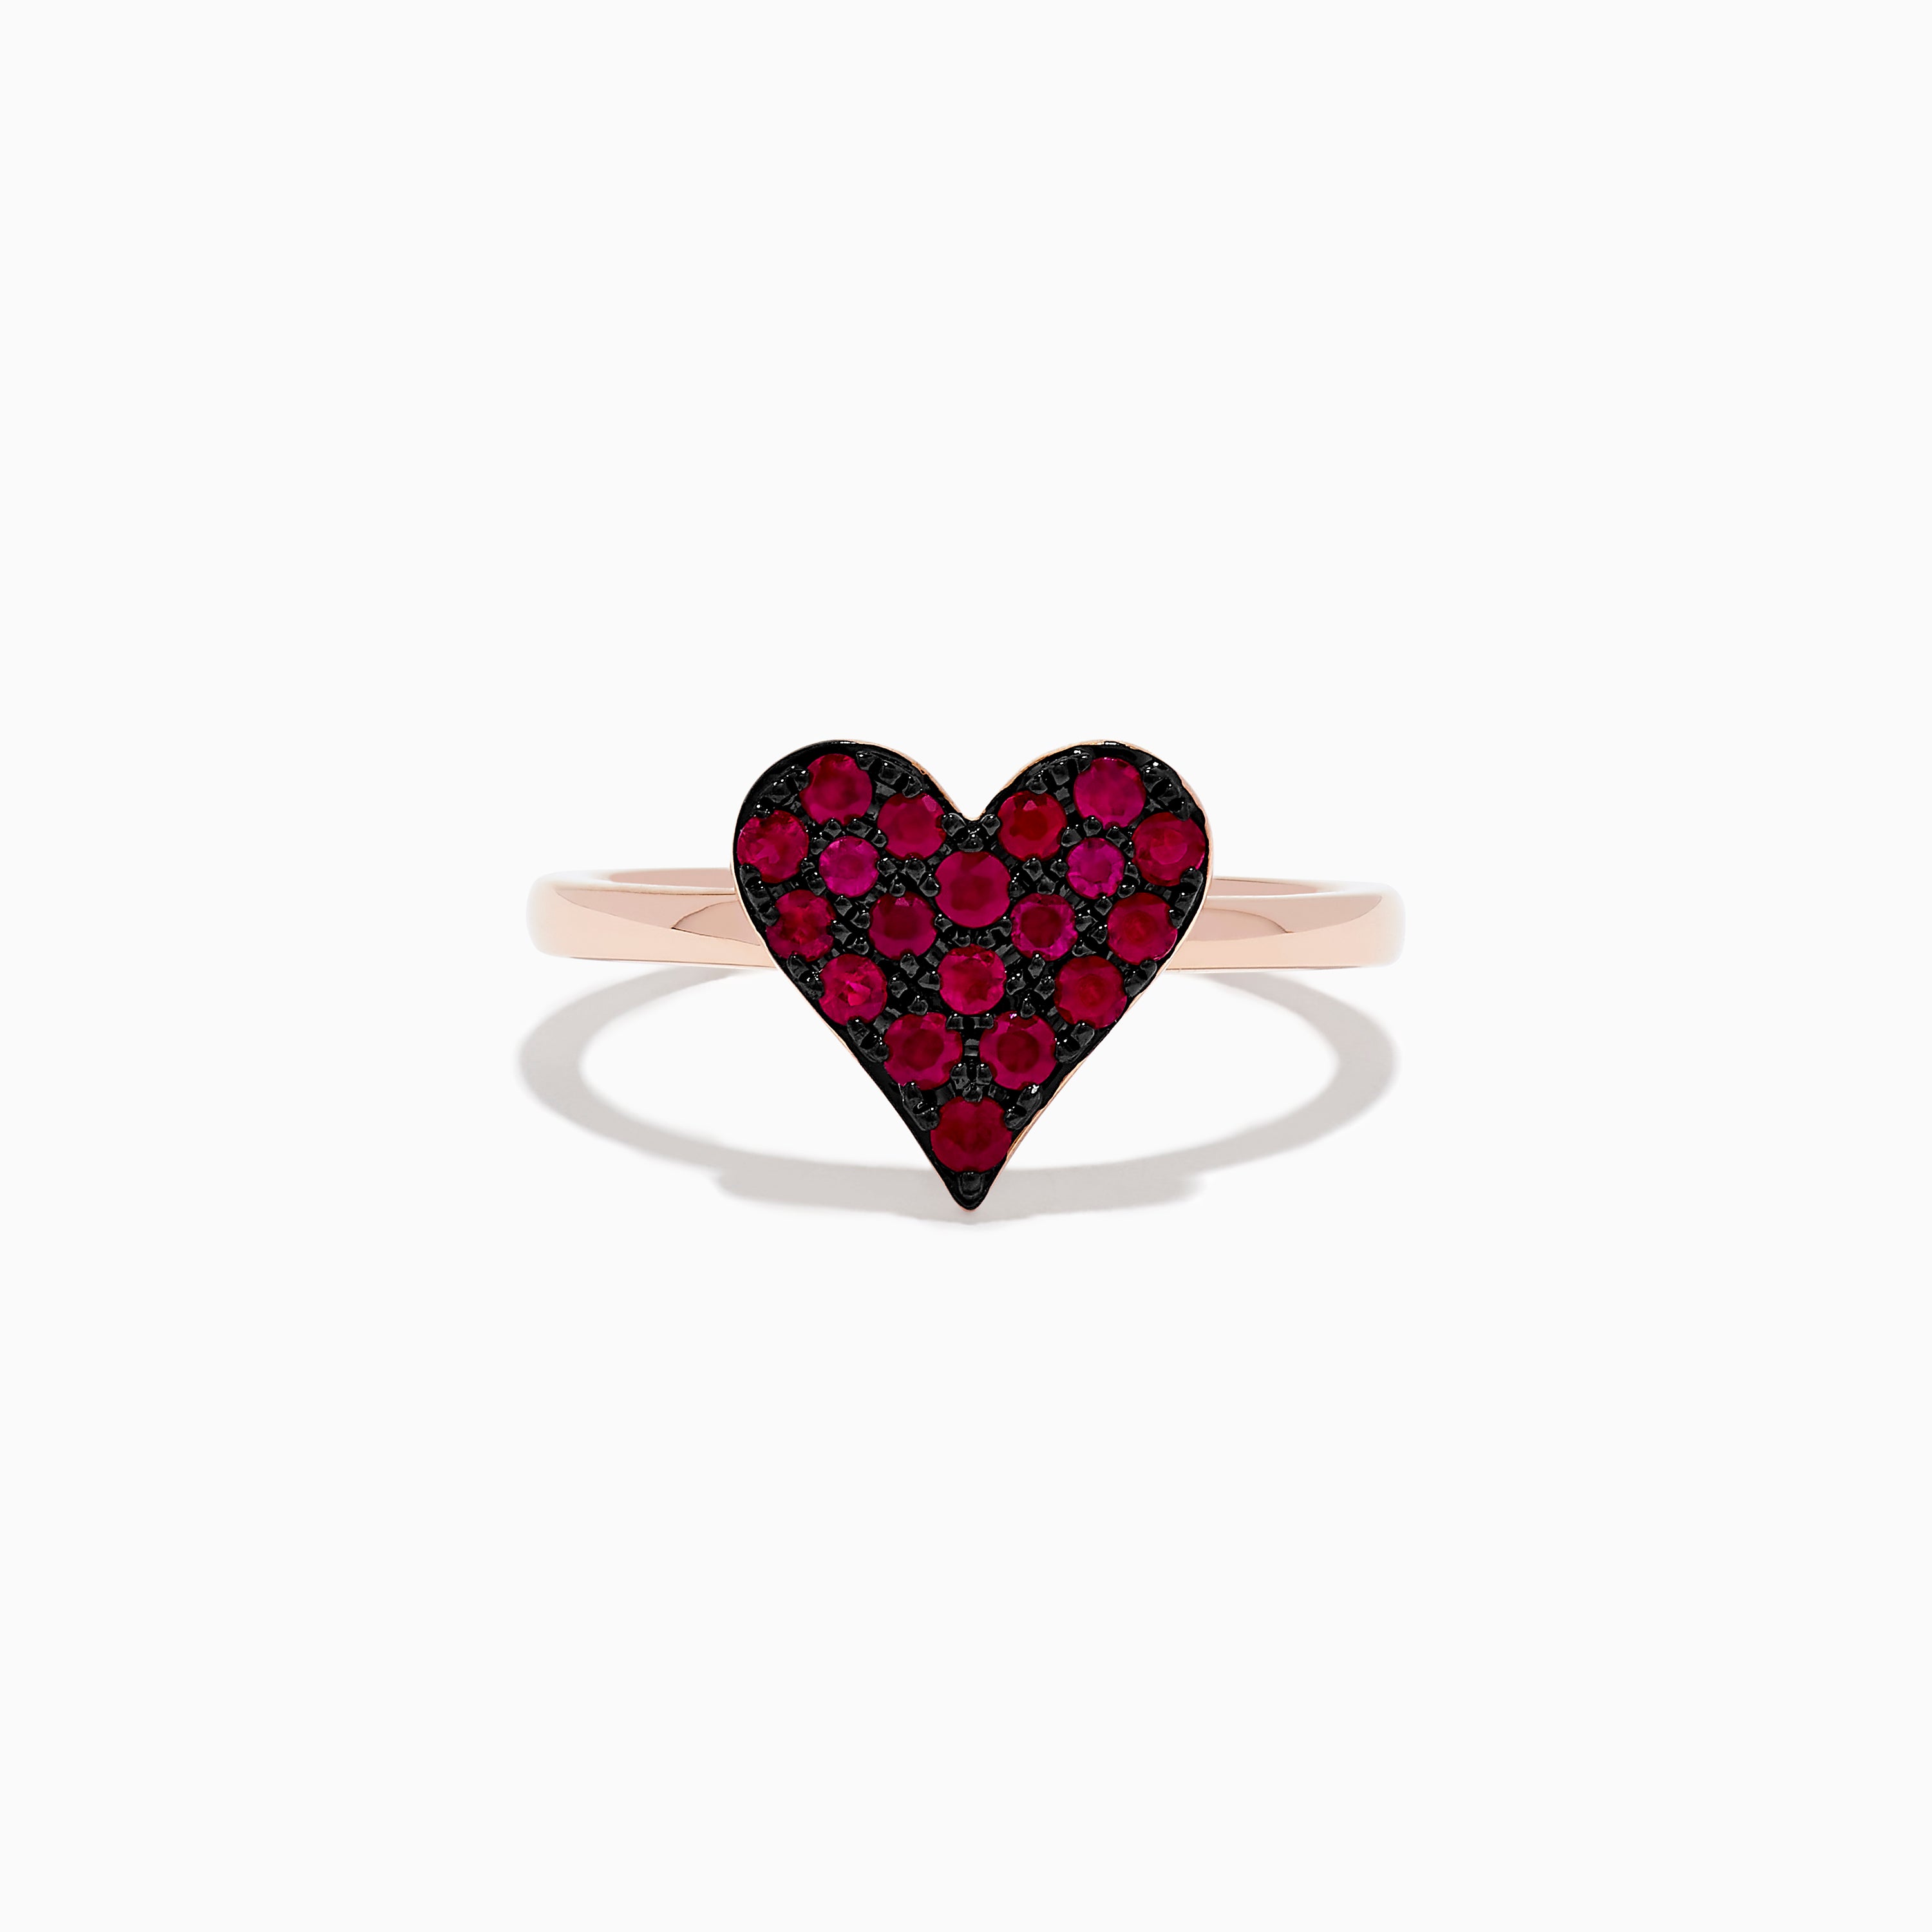 Buy Red Heart Cz Silver Ring Womens Promise Ring Heart Ring Love Ring  Silver Ring Online in India - Etsy